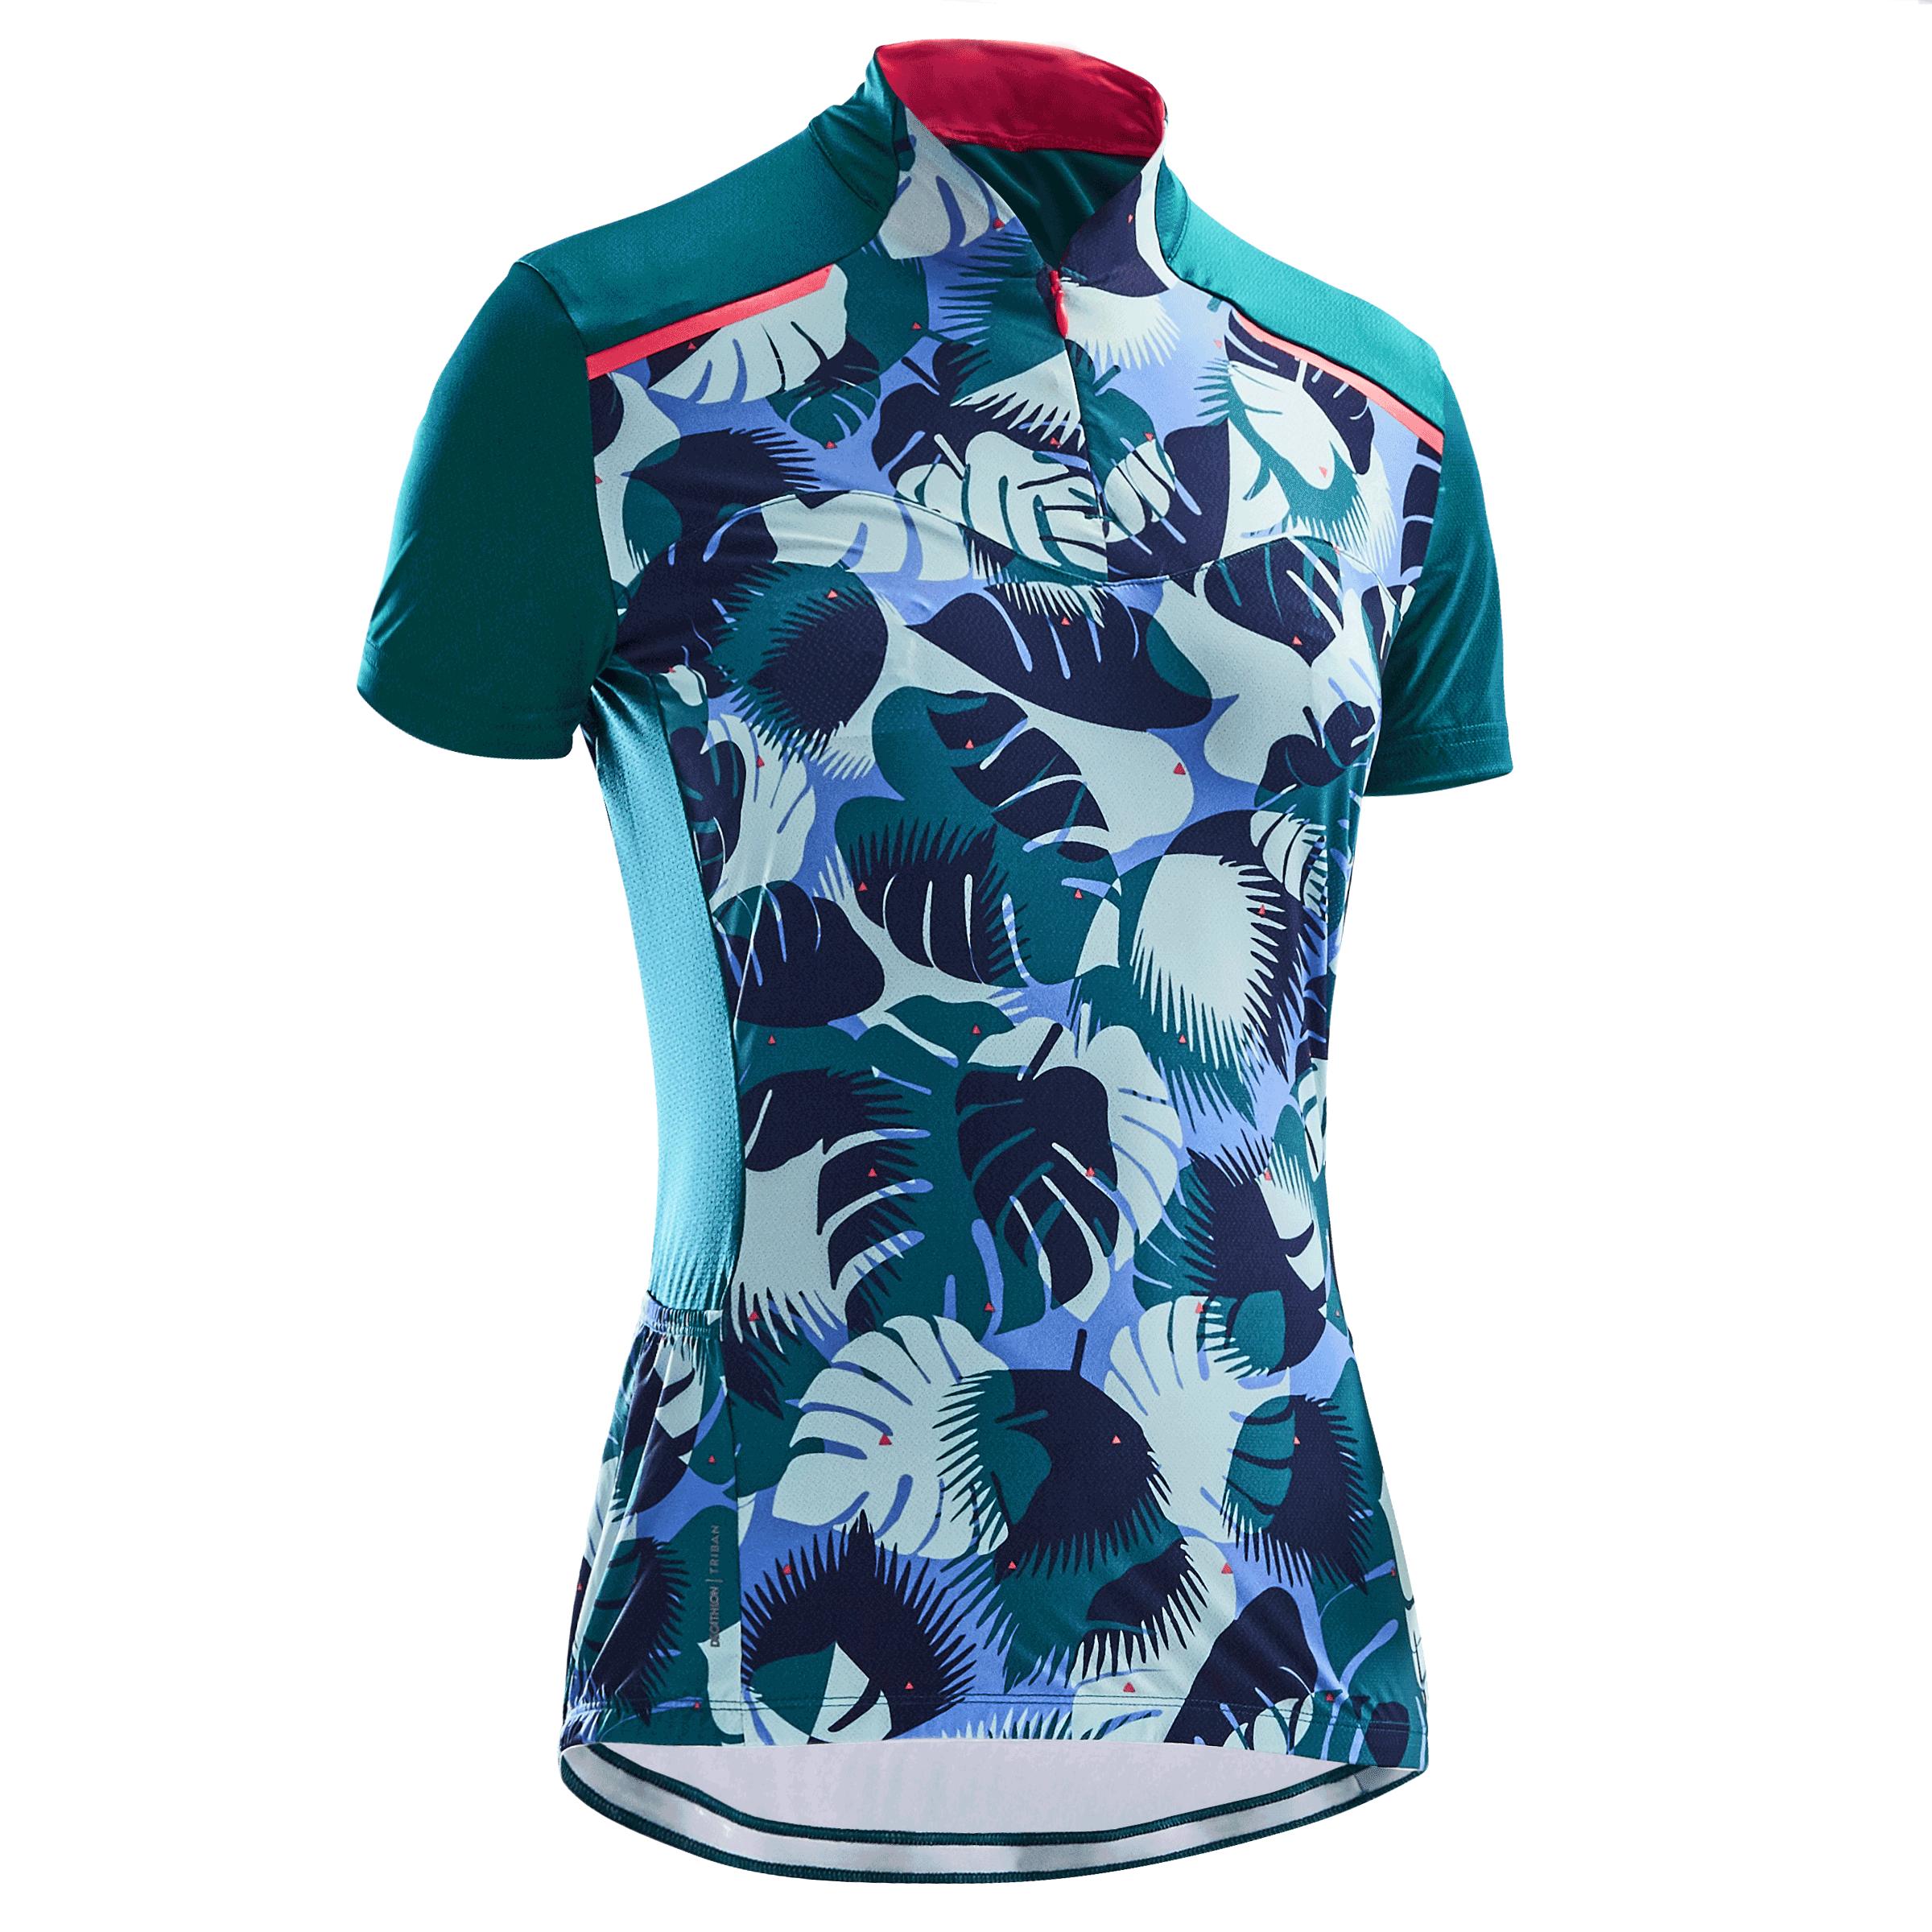 TRIBAN 500 Women's Short-Sleeved Cycling Jersey - Green Palm